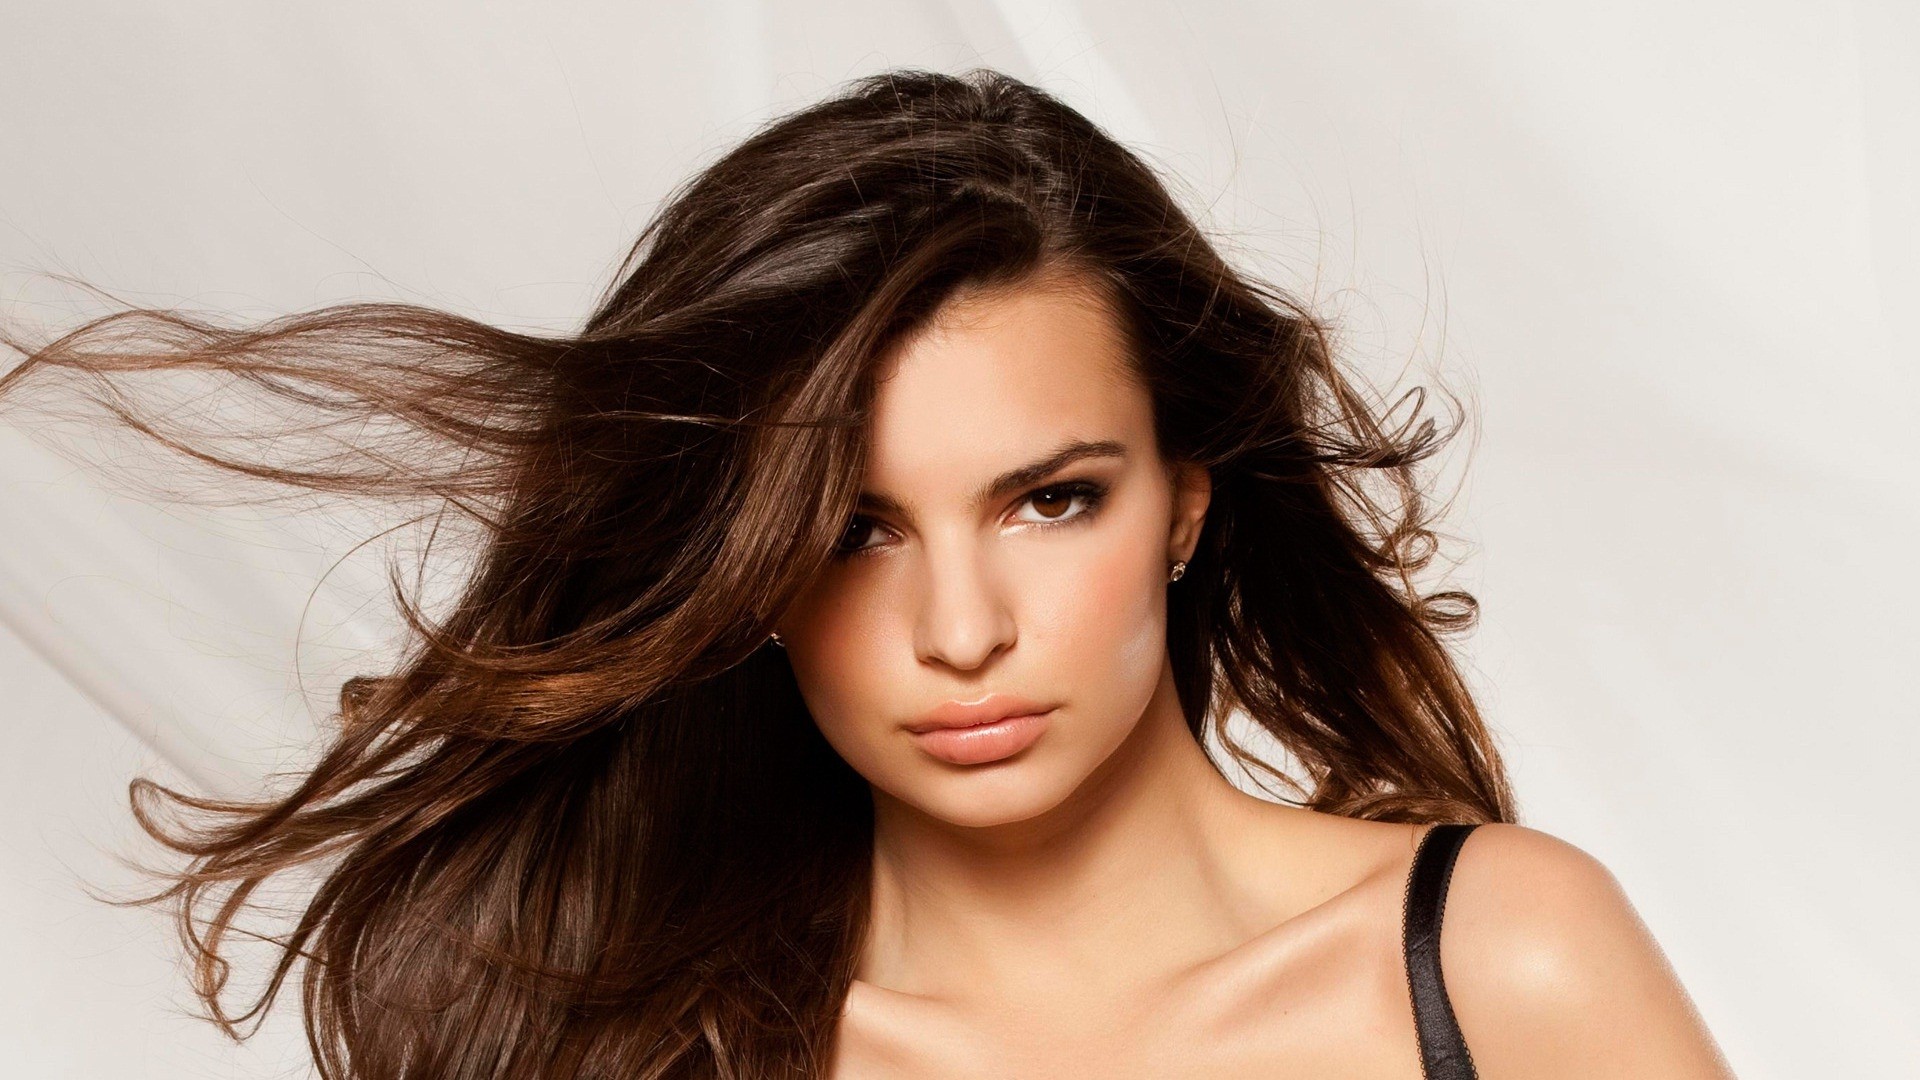 110+ Emily Ratajkowski HD Wallpapers and Backgrounds